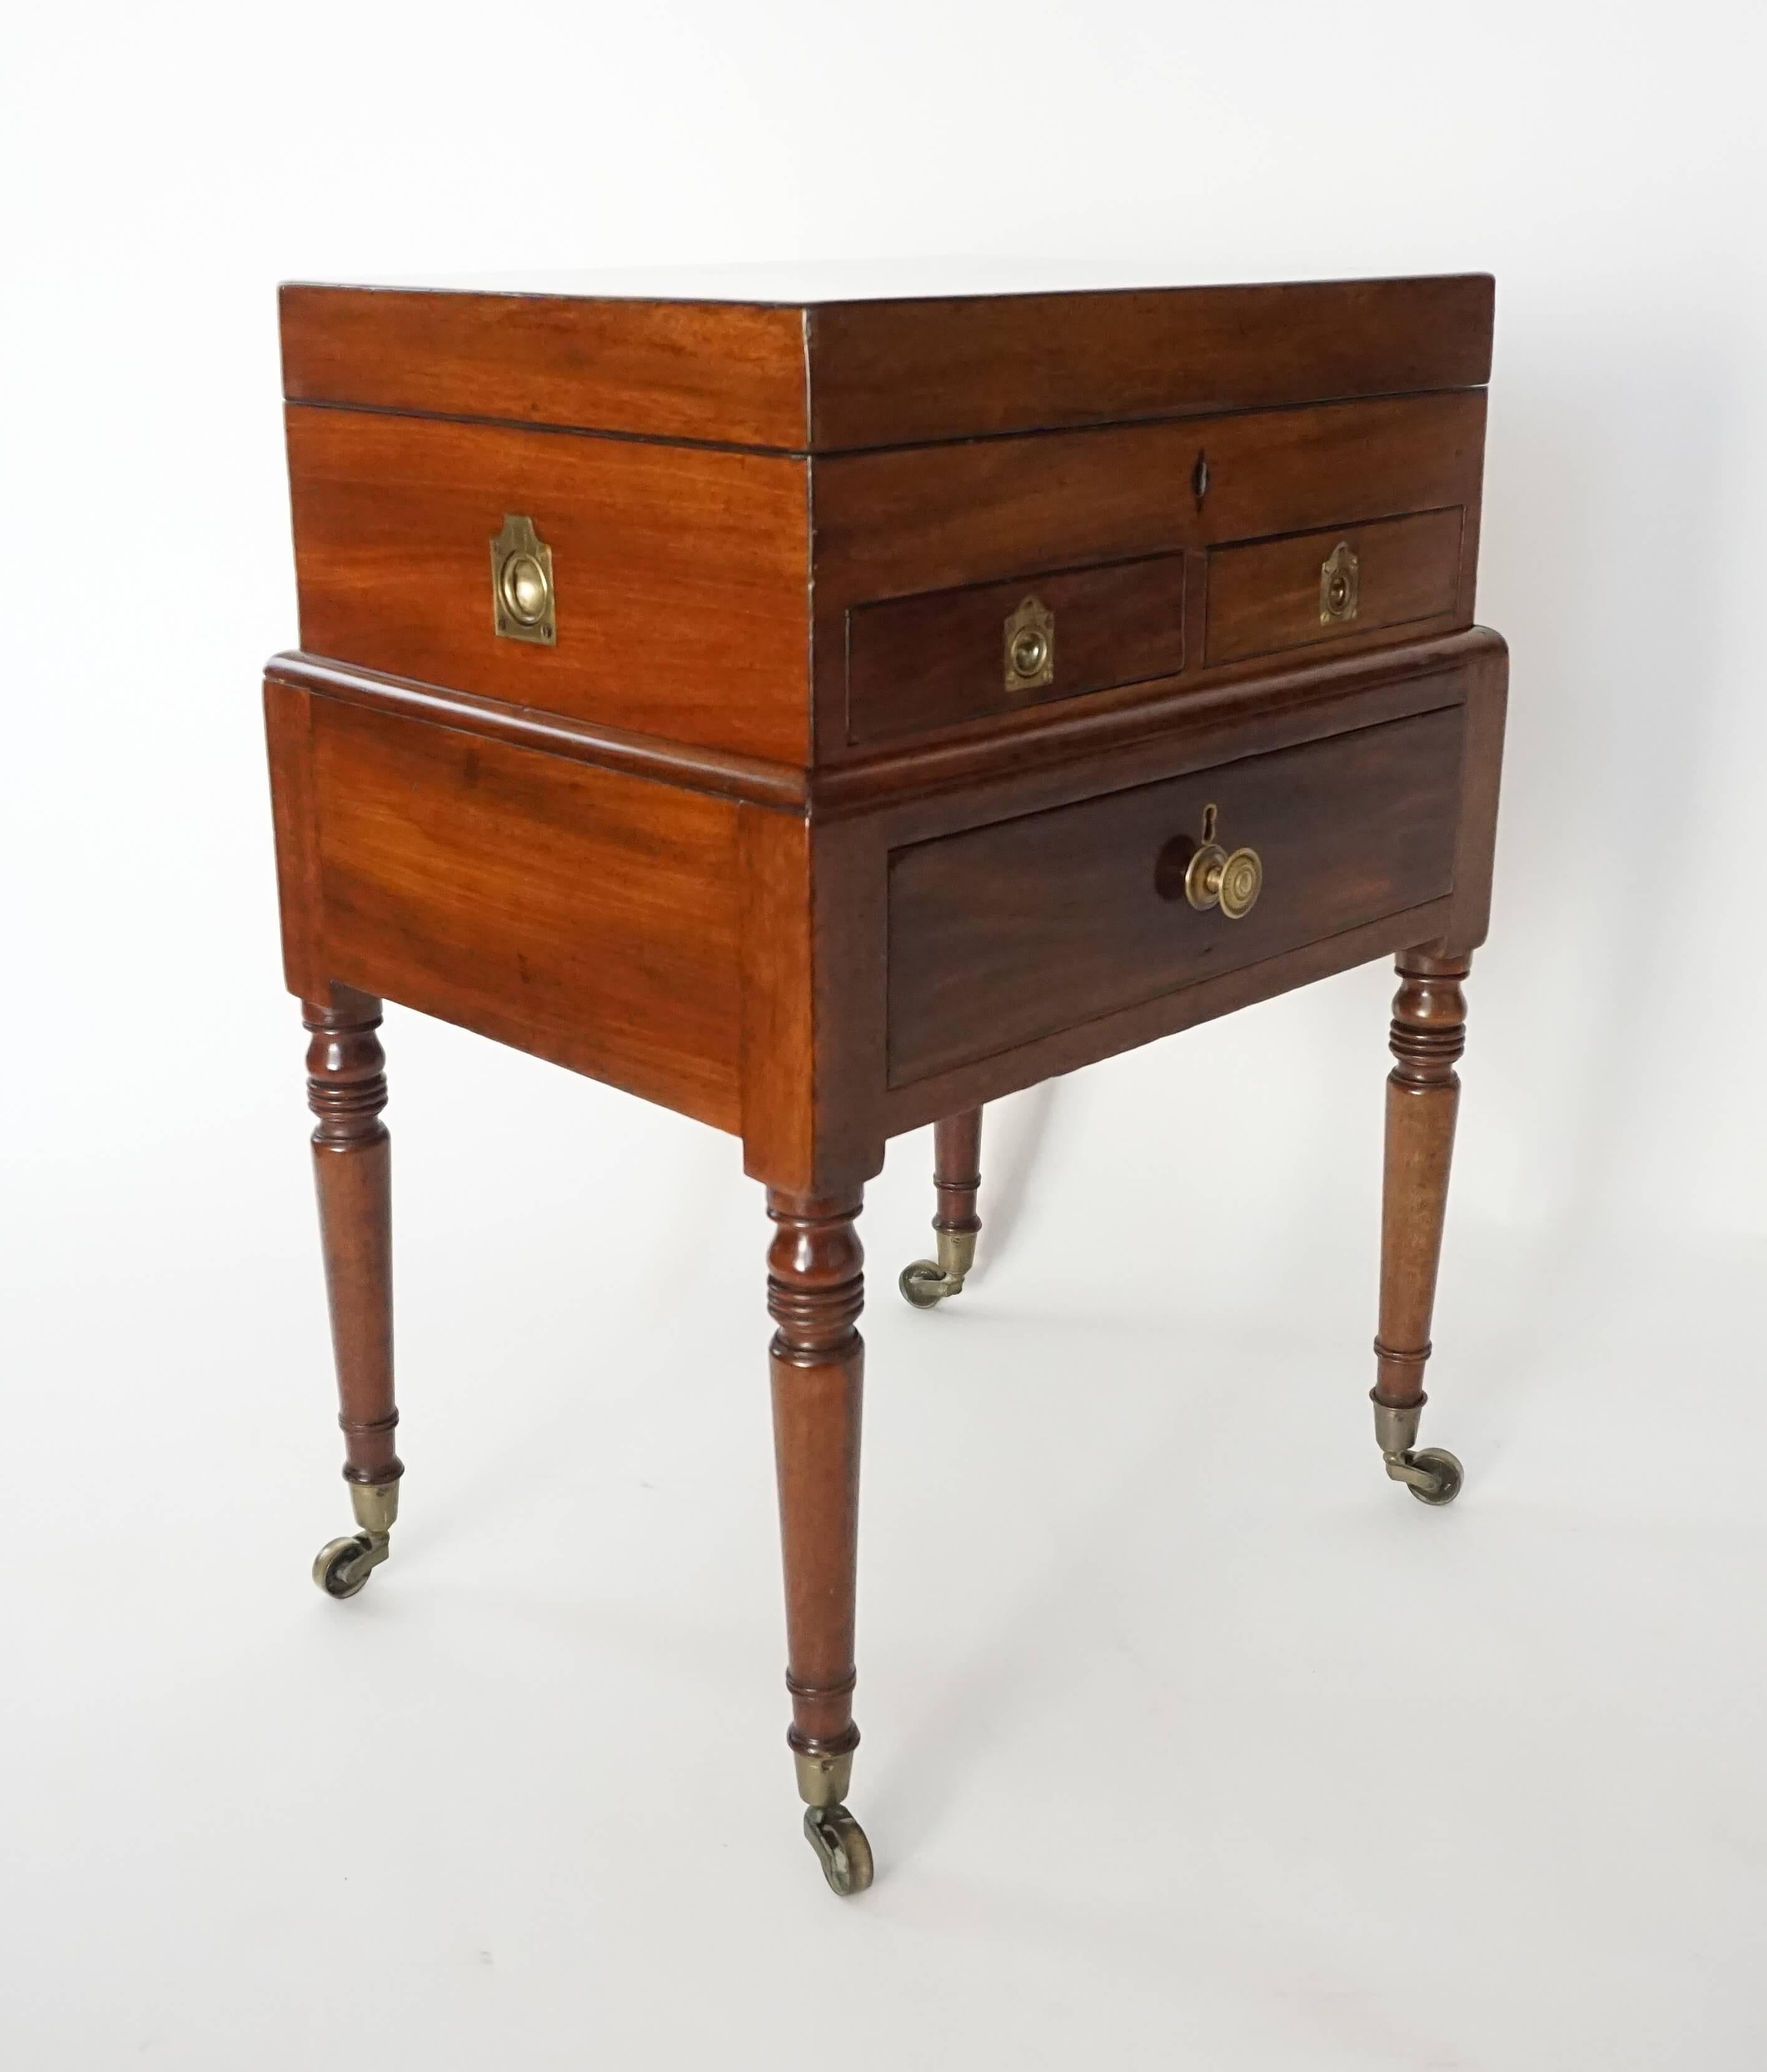 English Regency period mahogany British campaign chest or box on stand, circa 1820; the removable chest having hinged top revealing locking upper storage compartment above two internally locking lower drawers with divided compartments; the exterior